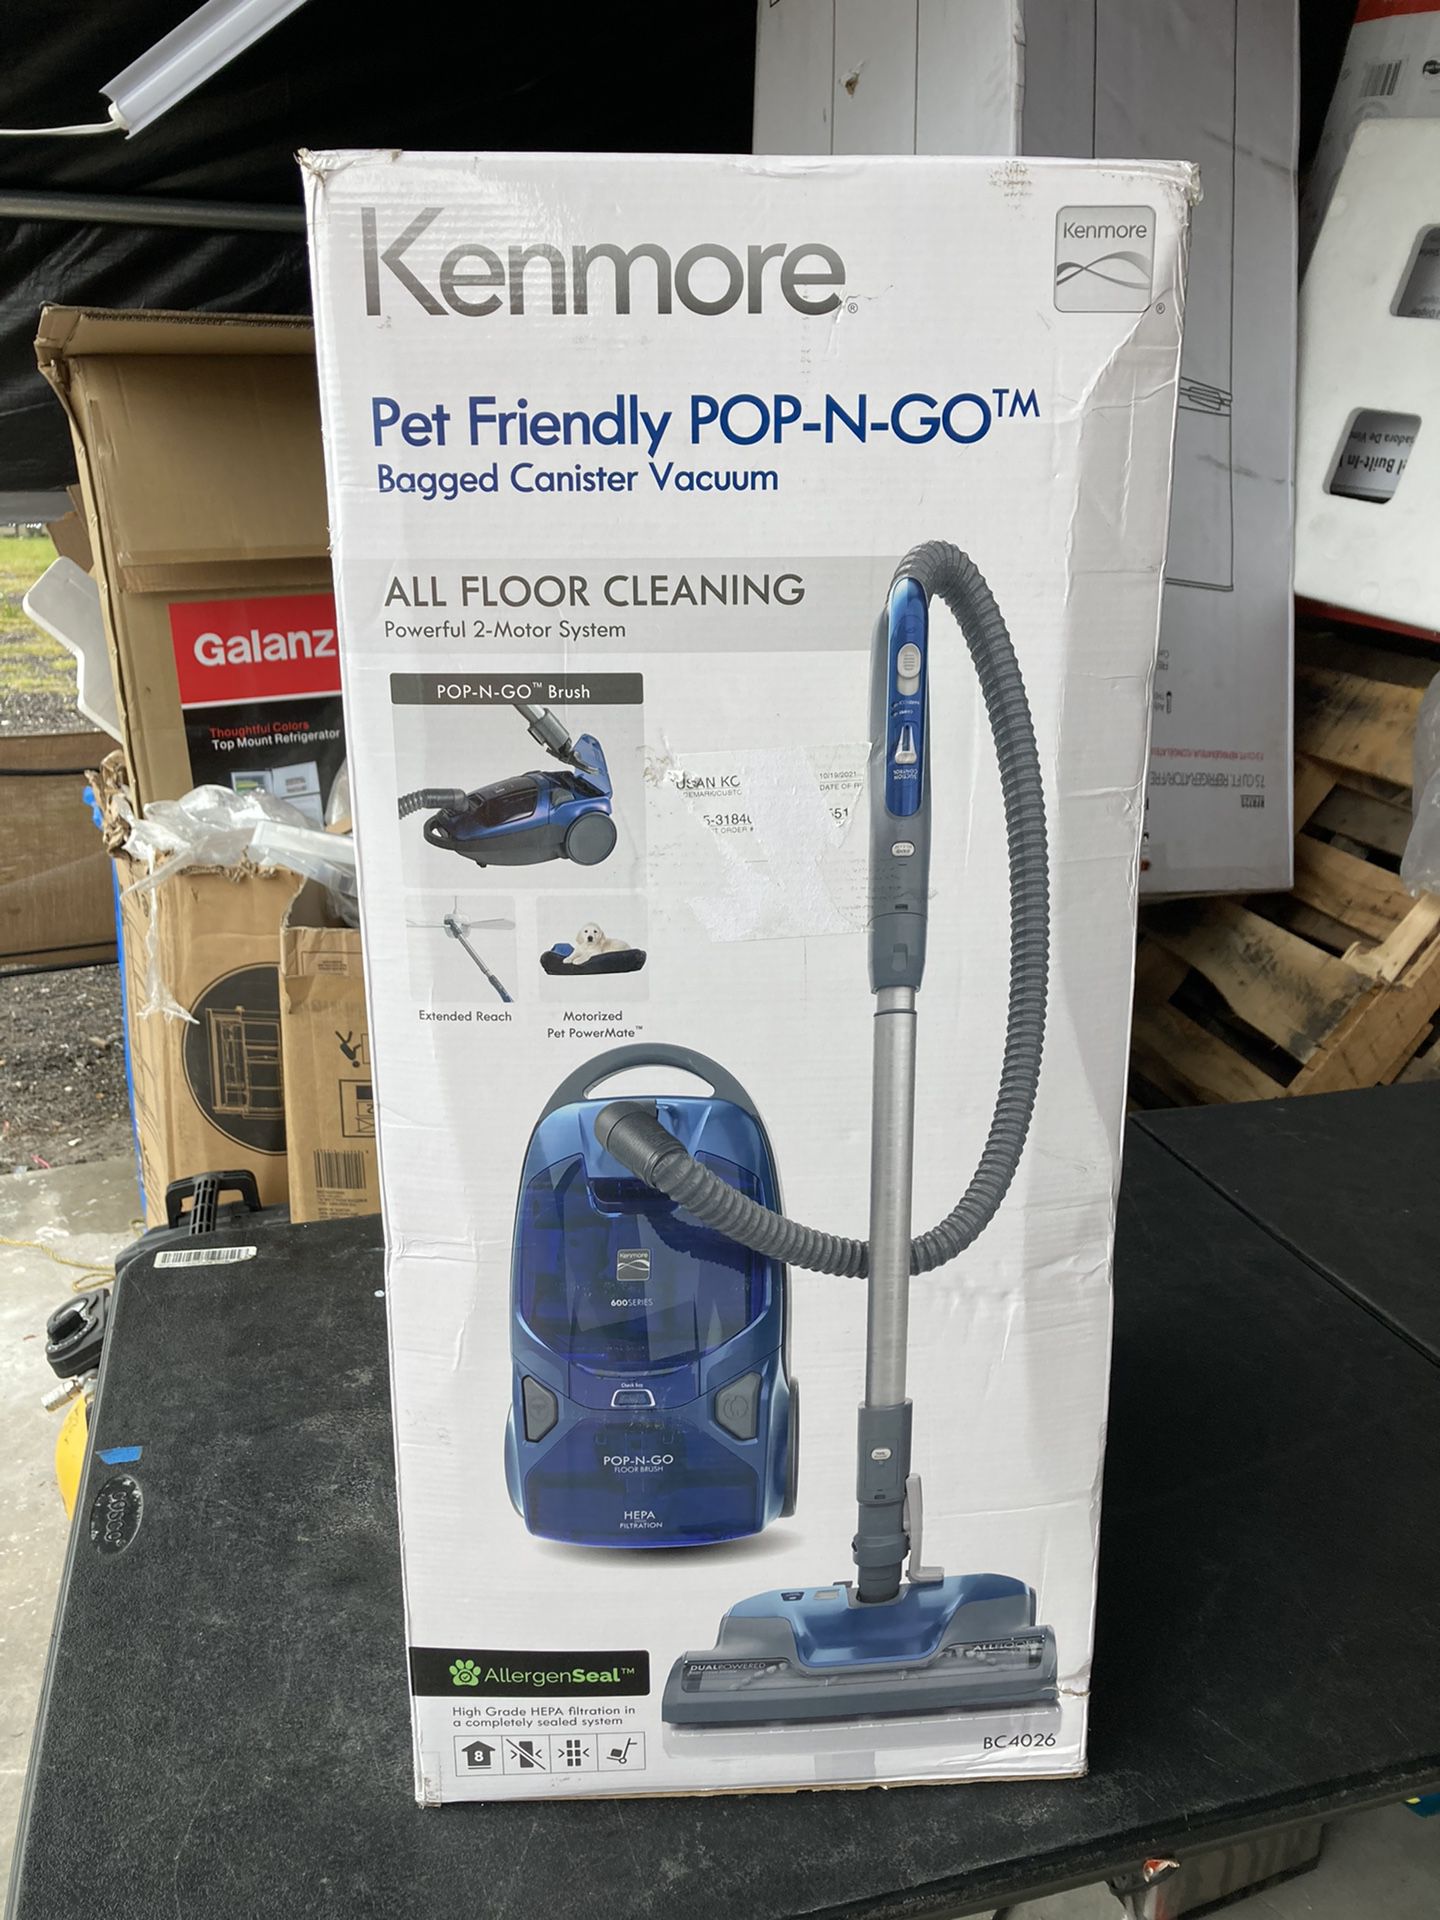 kenmore per friendly por-n-go bagged canister vaccum all floor cleaning